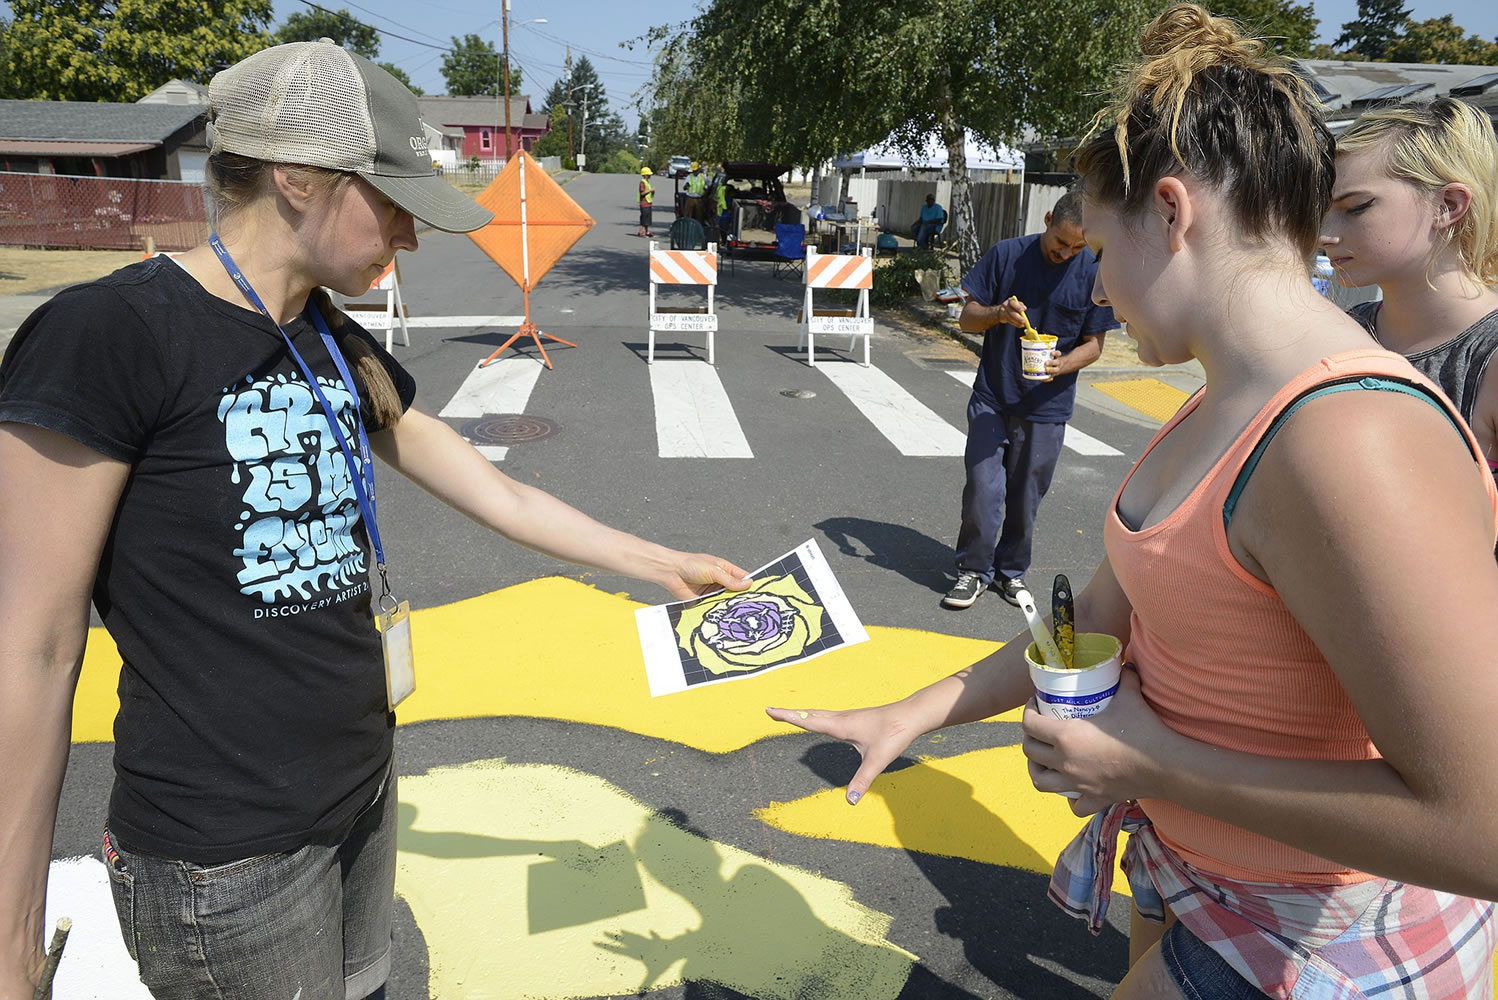 Ariane Kunze/The Columbian
Discovery Middle School art teacher Miranda Wakeman (left) and Haven Rinehart, 12, review plans for a street mural at the corner of East 33rd and R streets in Rose Village. The attention-getting mural is meant to discourage drivers from speeding through the neighborhood.